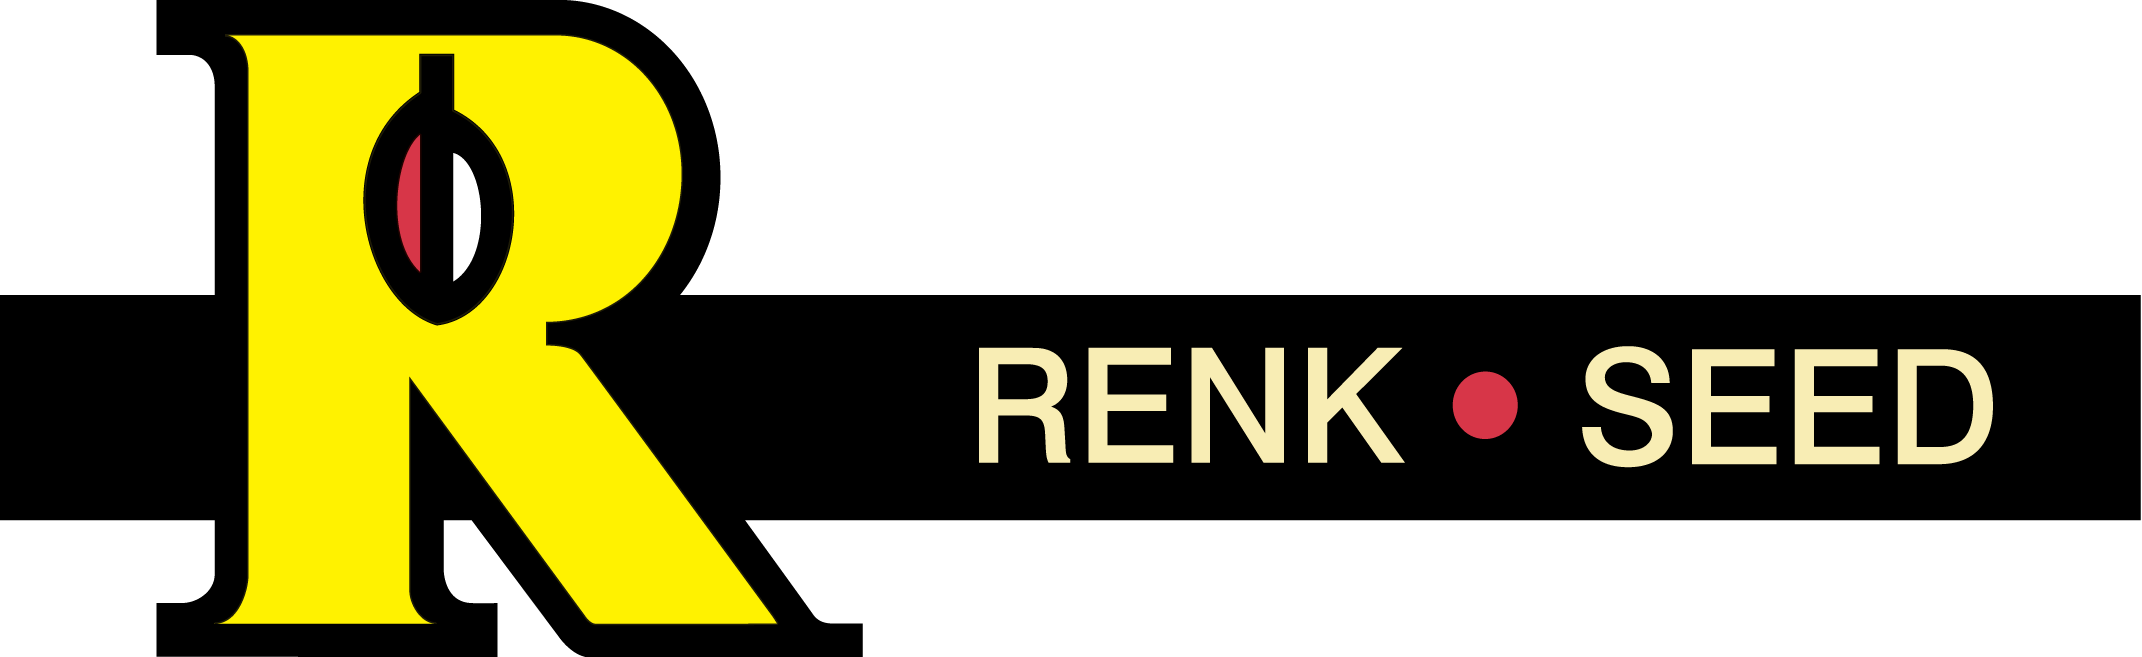 Soybeans - Renk Seed Logo (2142x657)